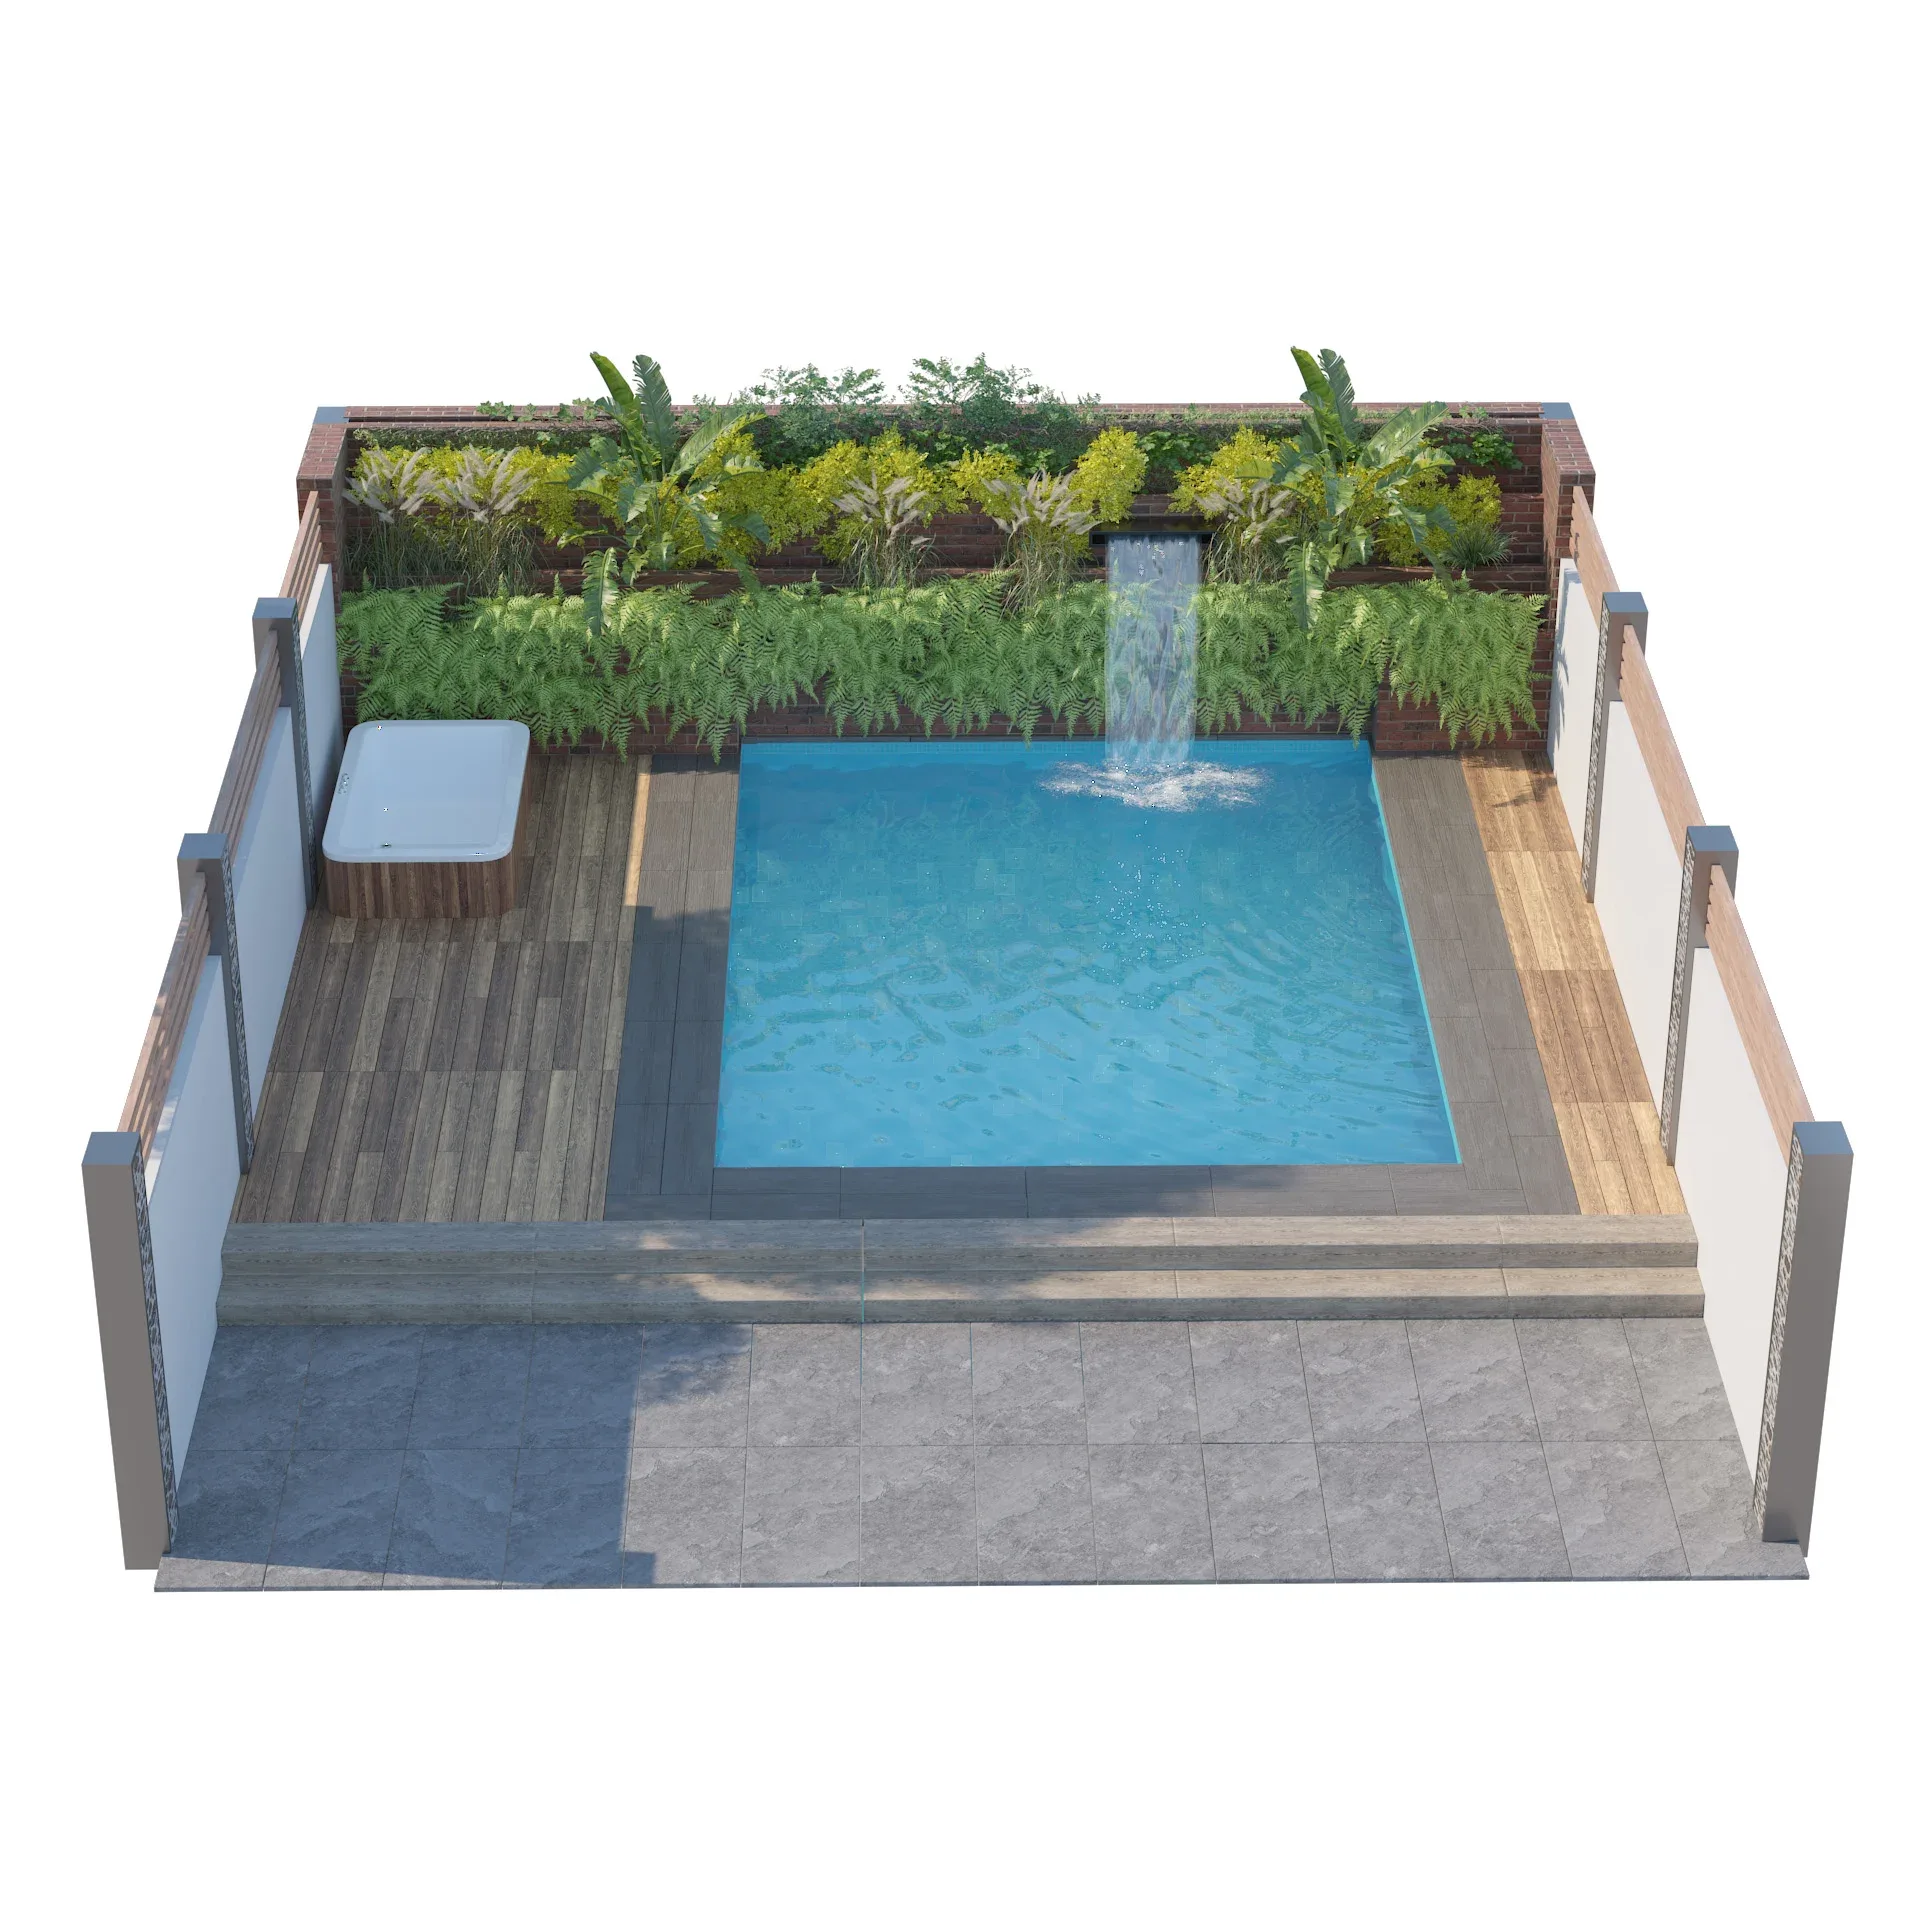 Garden pool with landscape